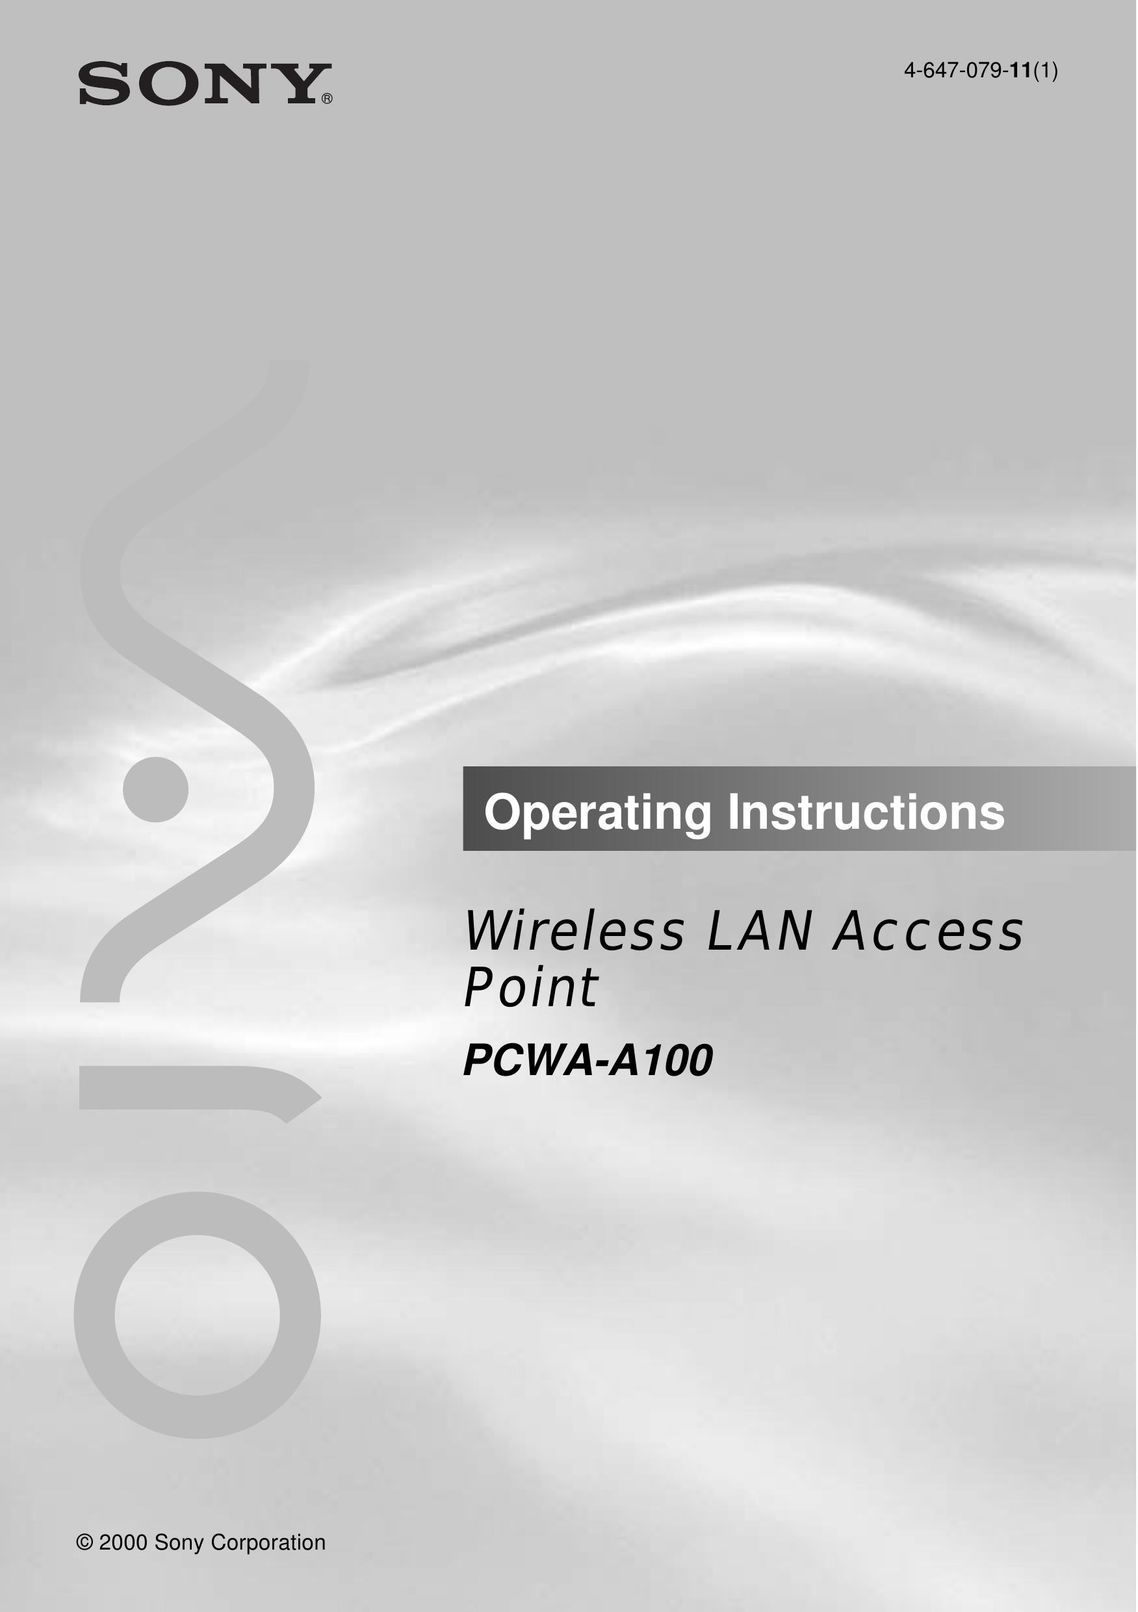 Sony PCWA-A100 Network Router User Manual